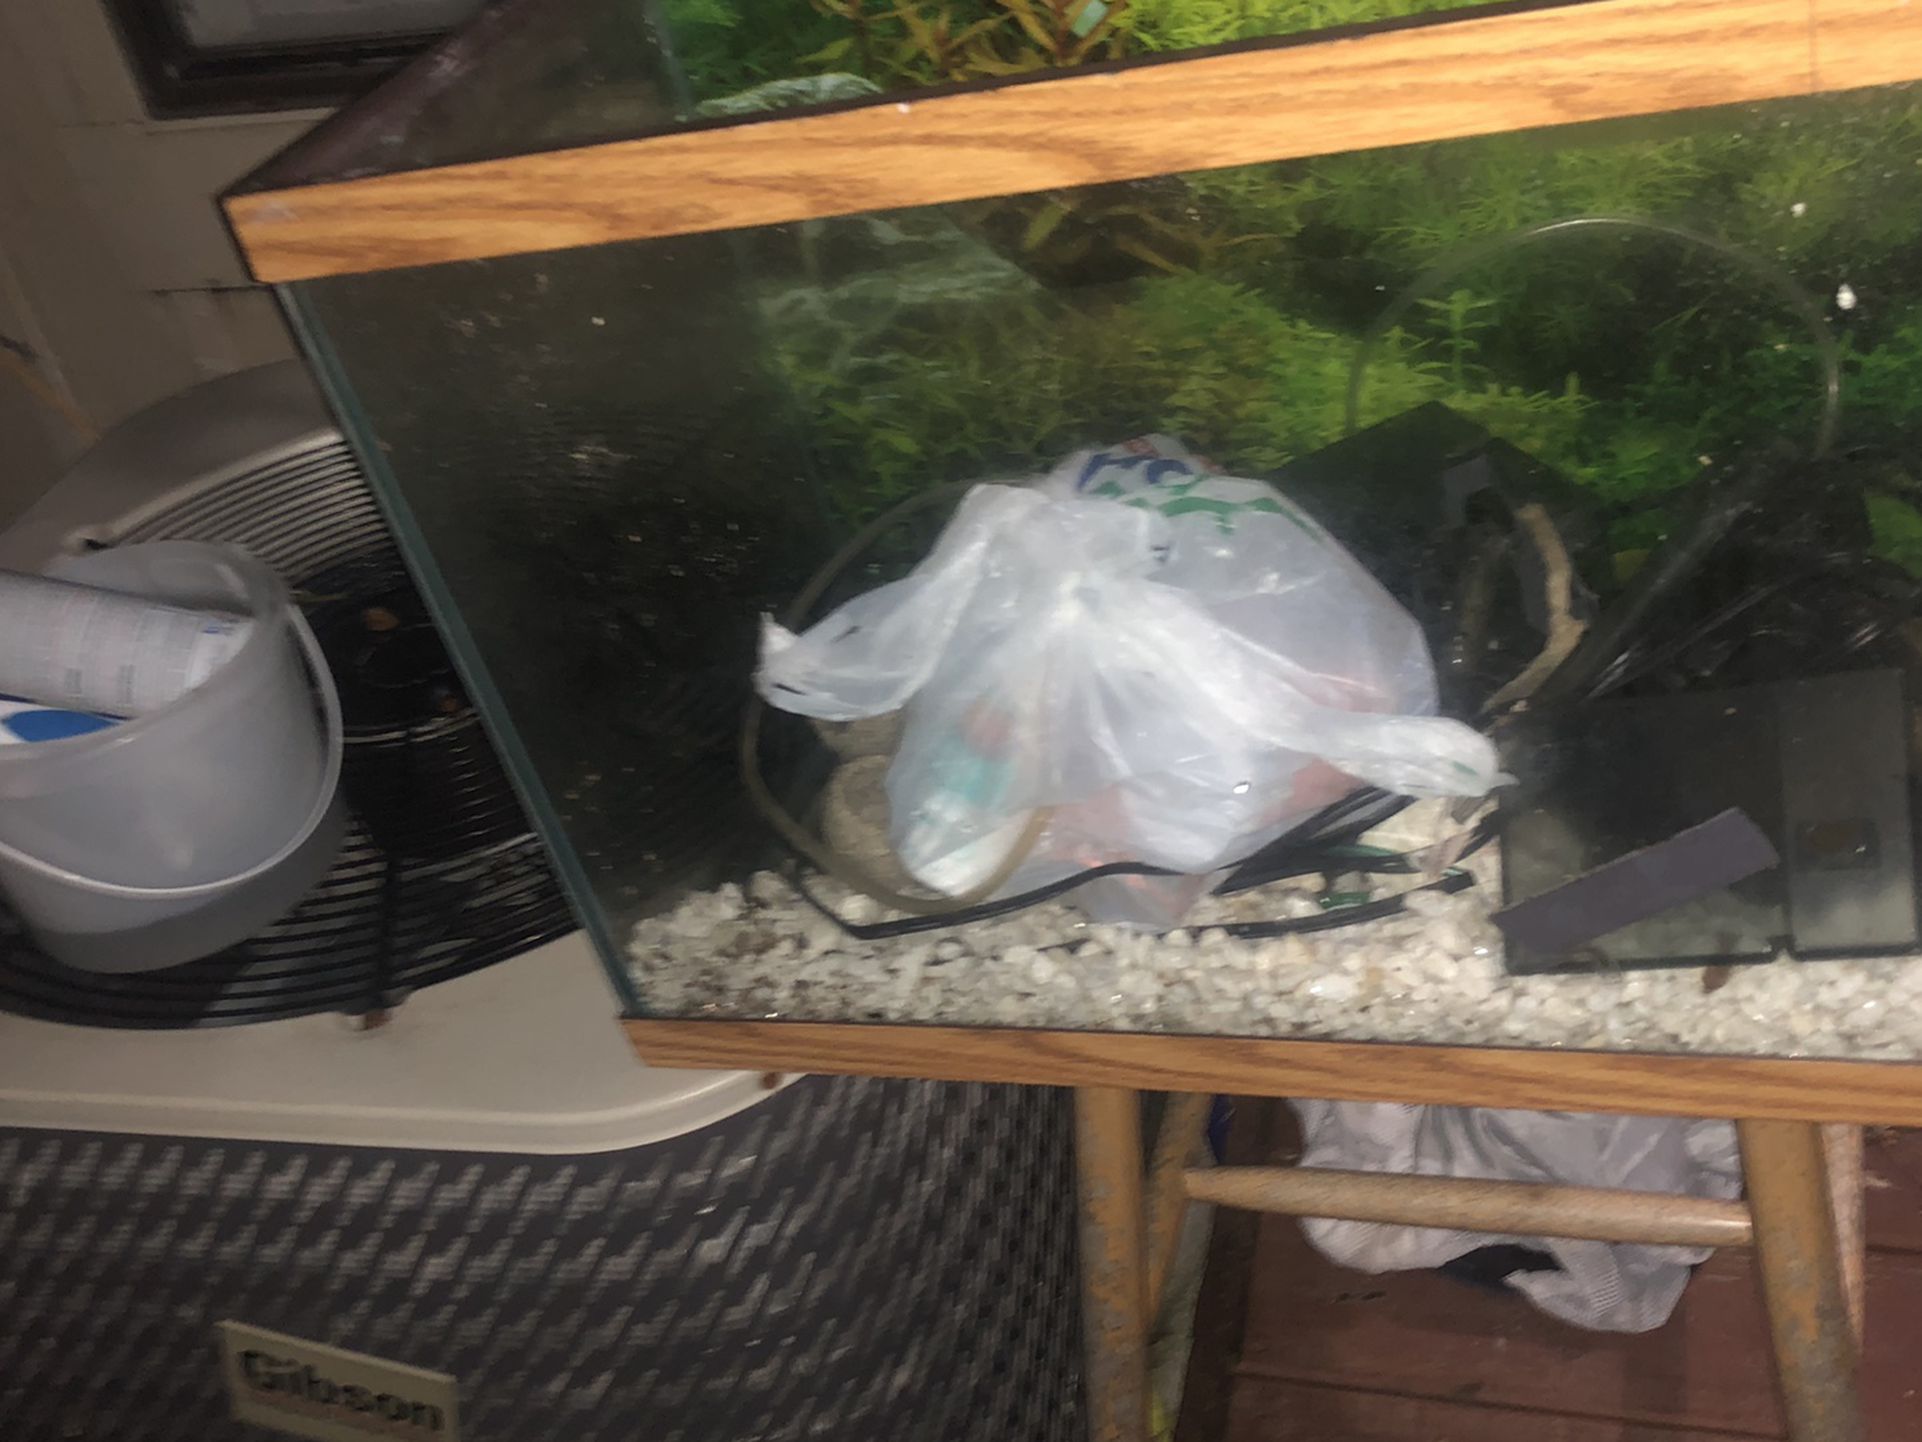 50 Gal Aquarium With Everything You Need, 2 Filters And Heater